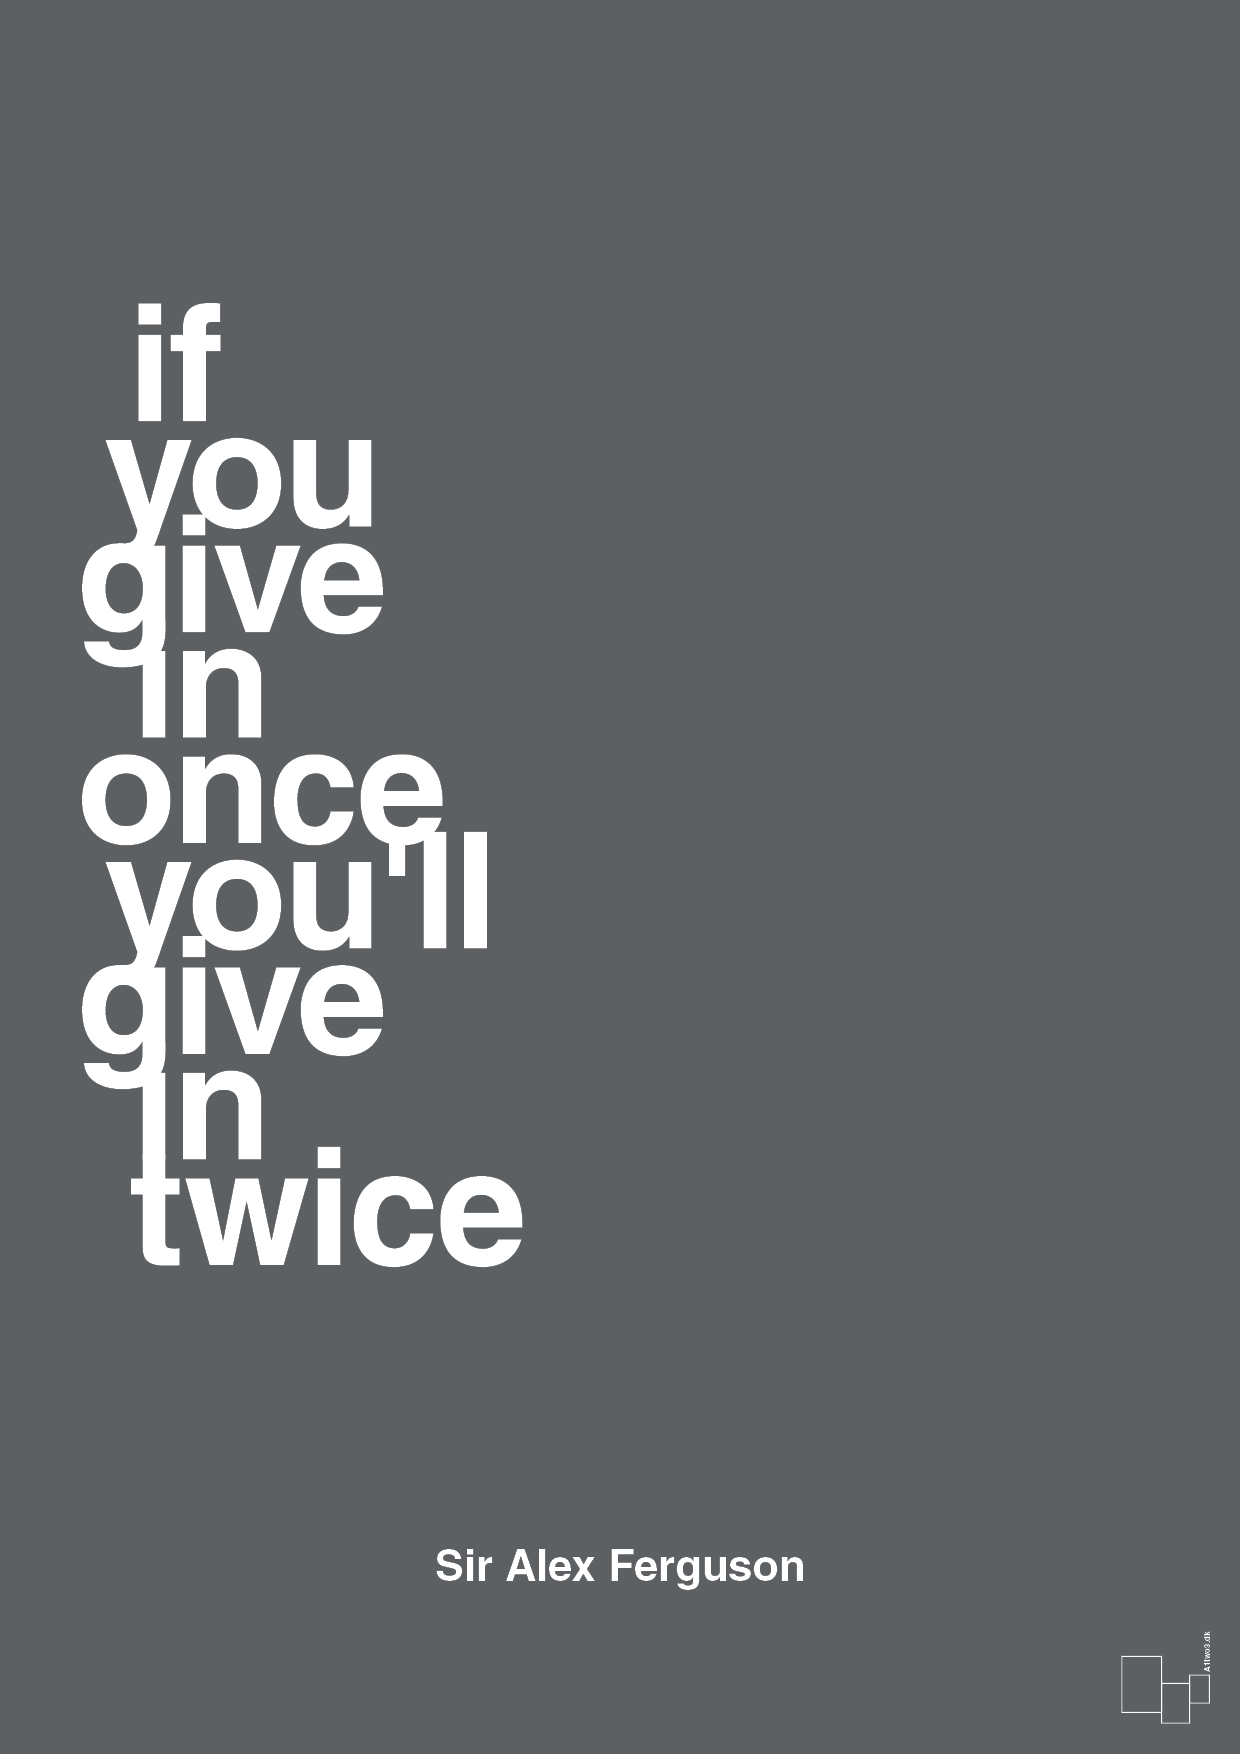 if you give in once you'll give in twice - Plakat med Citater i Graphic Charcoal